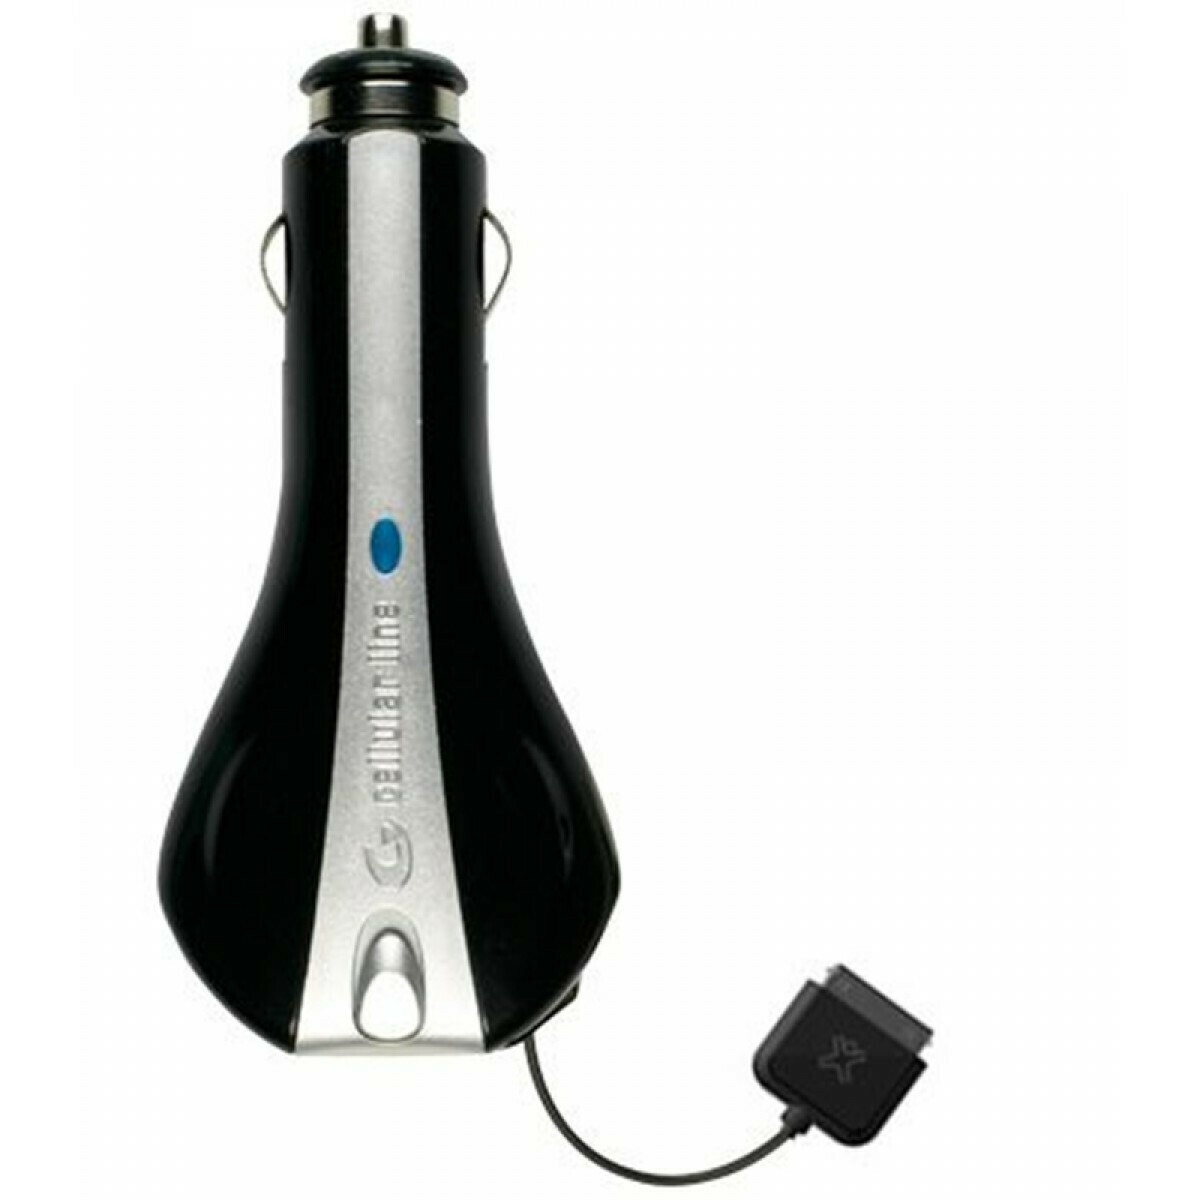 IPHONE 4S/4/3GS/3G Cellularline Roller Car Charger 